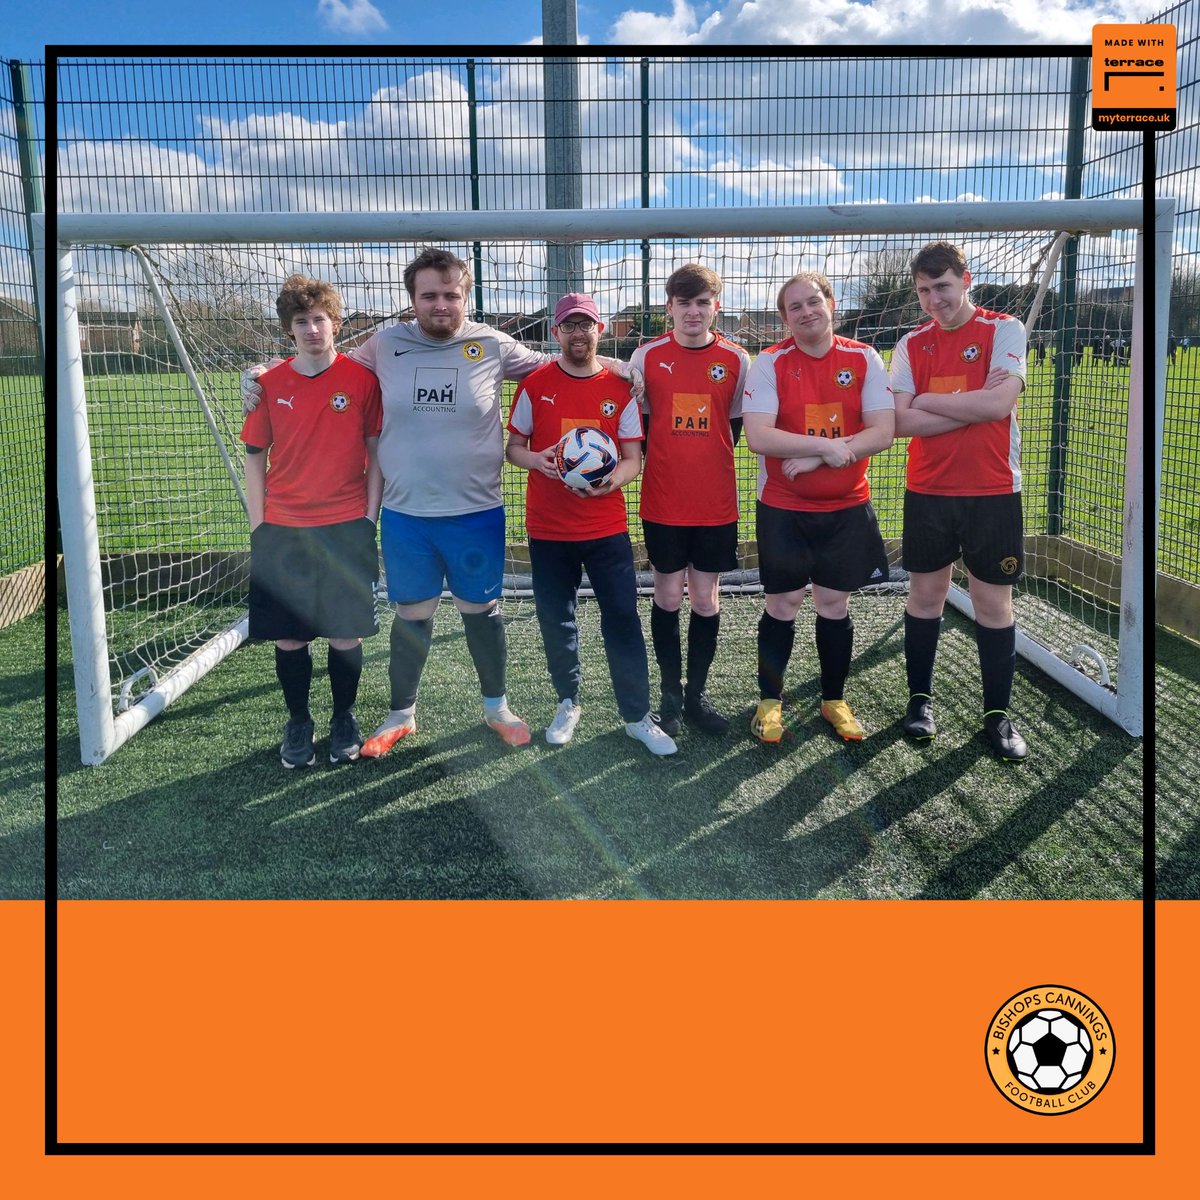 Did you know the club run Pan-Disability sessions? Ages 12-17 Mondays 5pm Age 16+ Fridays 4pm Qualified coaches, fun Sessions, open to male & female players Pan Disabilty covers a variety of impairments including Autism & ADHD Message for more info #upthecannings ⚽️🧡🖤⚽️